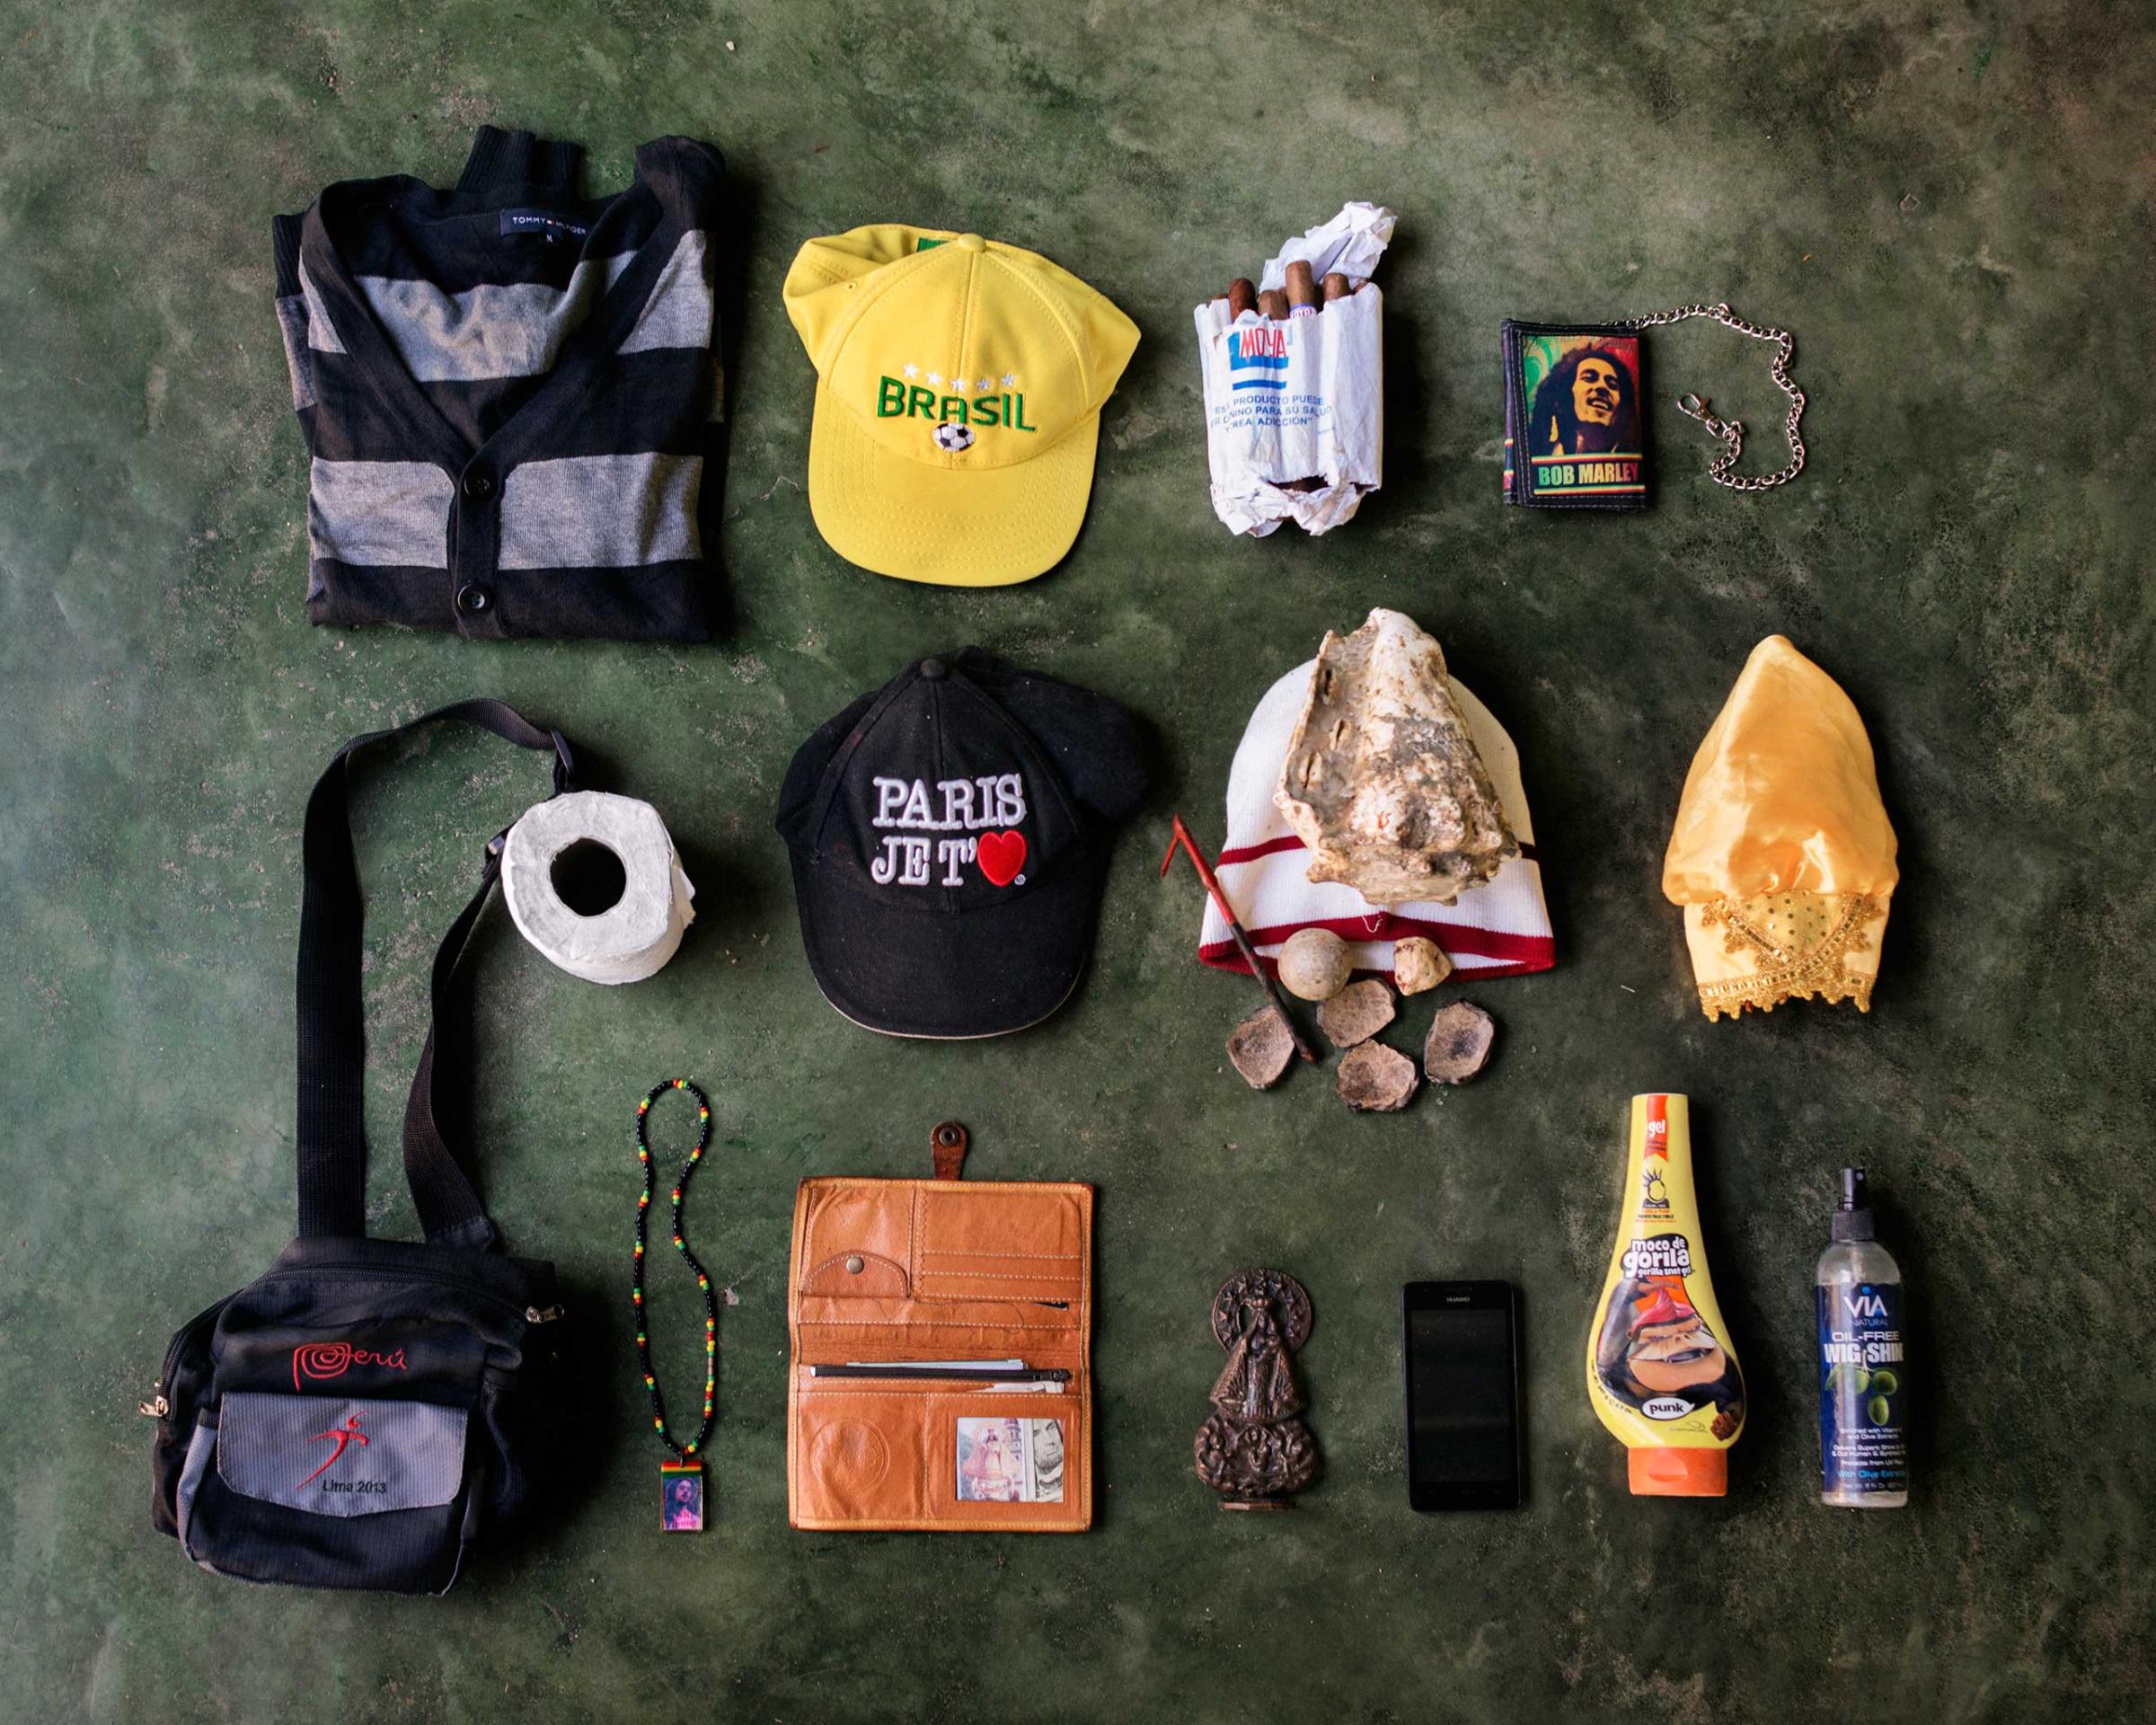 Roger Savòn Court, 40, from Cuba. He flew to Colombia and traveled illegally through South America up to Guatemala. He wants to reach the U.S.A. and work honestly for the American society. In his bag has a sweater, two caps, cigars, wallet, toilet paper, a big shell talisman who guide him on the journey, headdress, fanny pack, necklace, document holder, a small Virgin Mary statue, mobile phone, hair gel and a detergent oil for the skin.